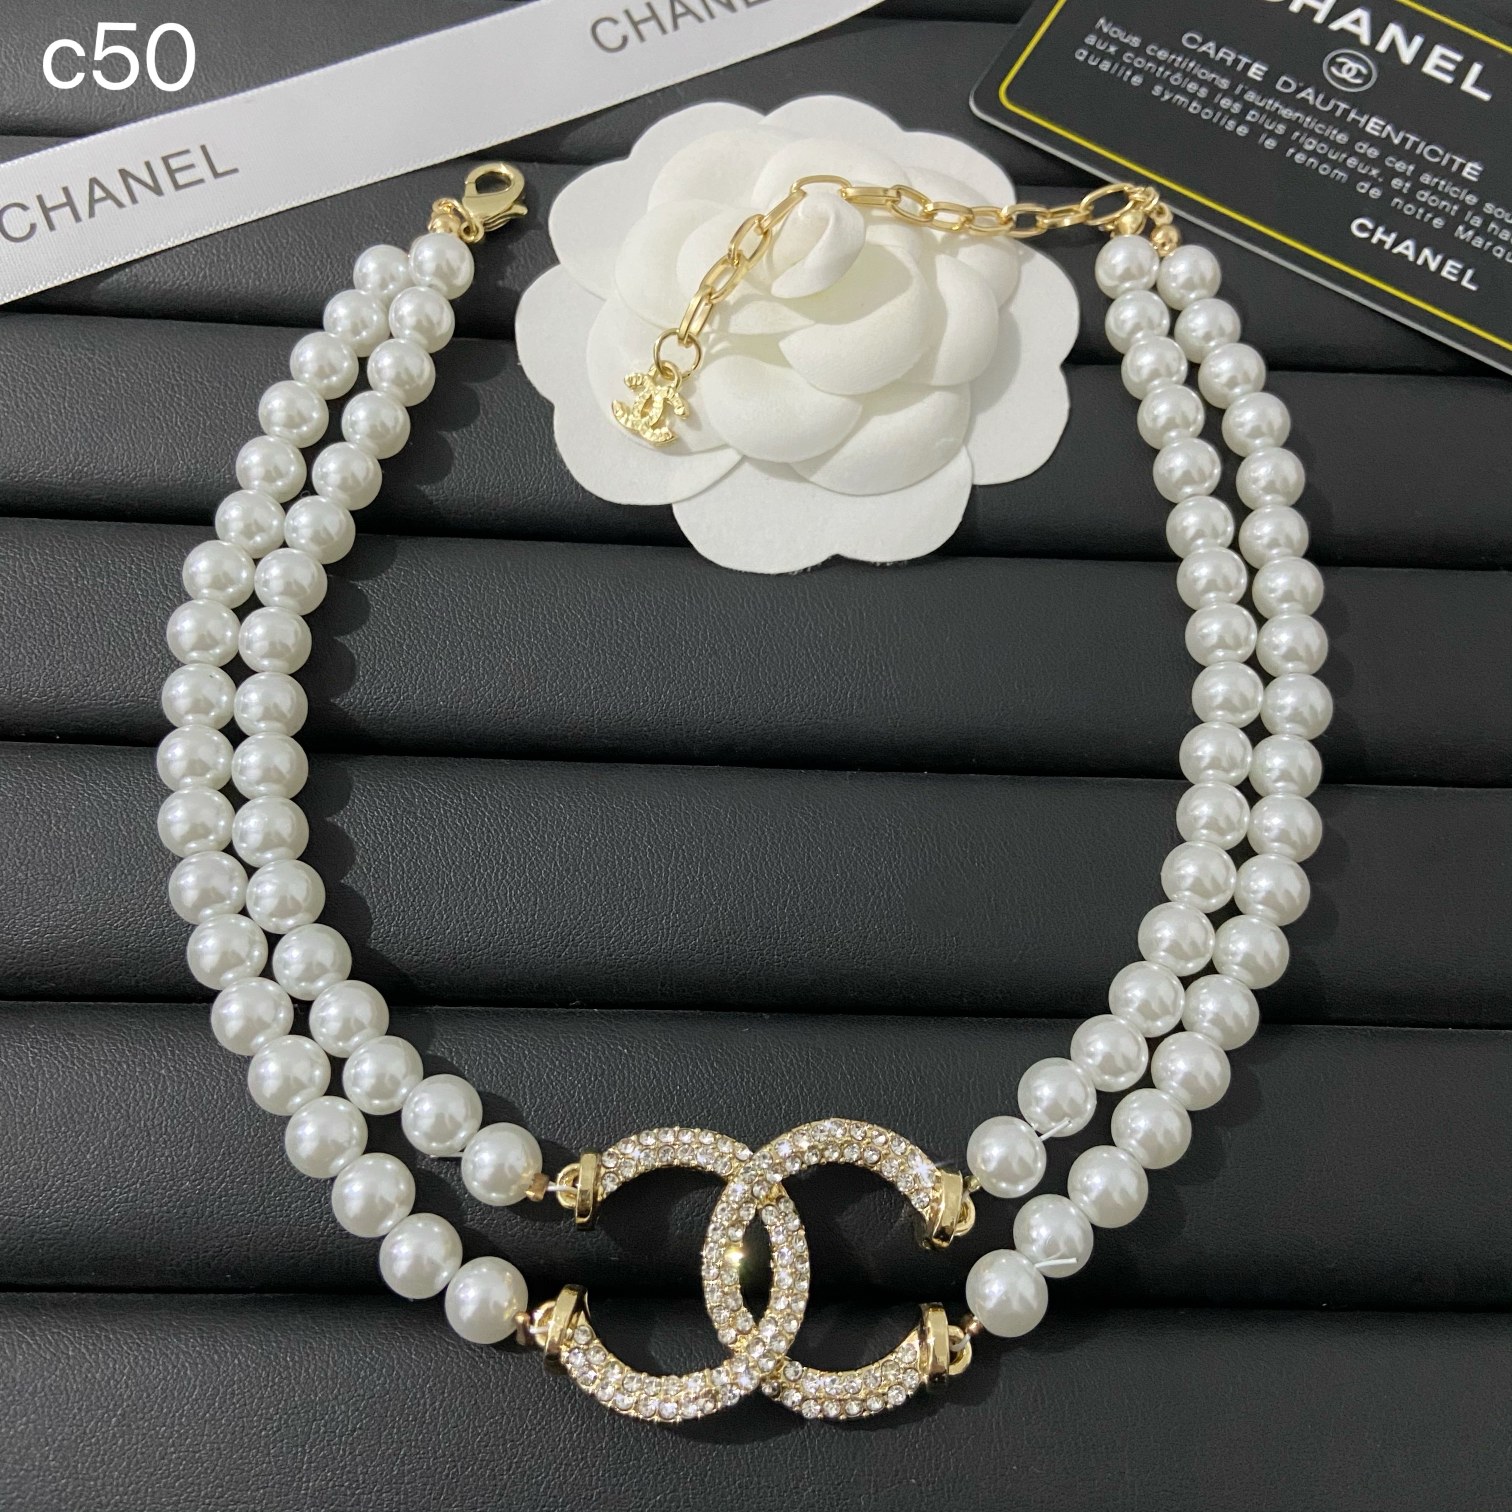 Chanel necklace 109241